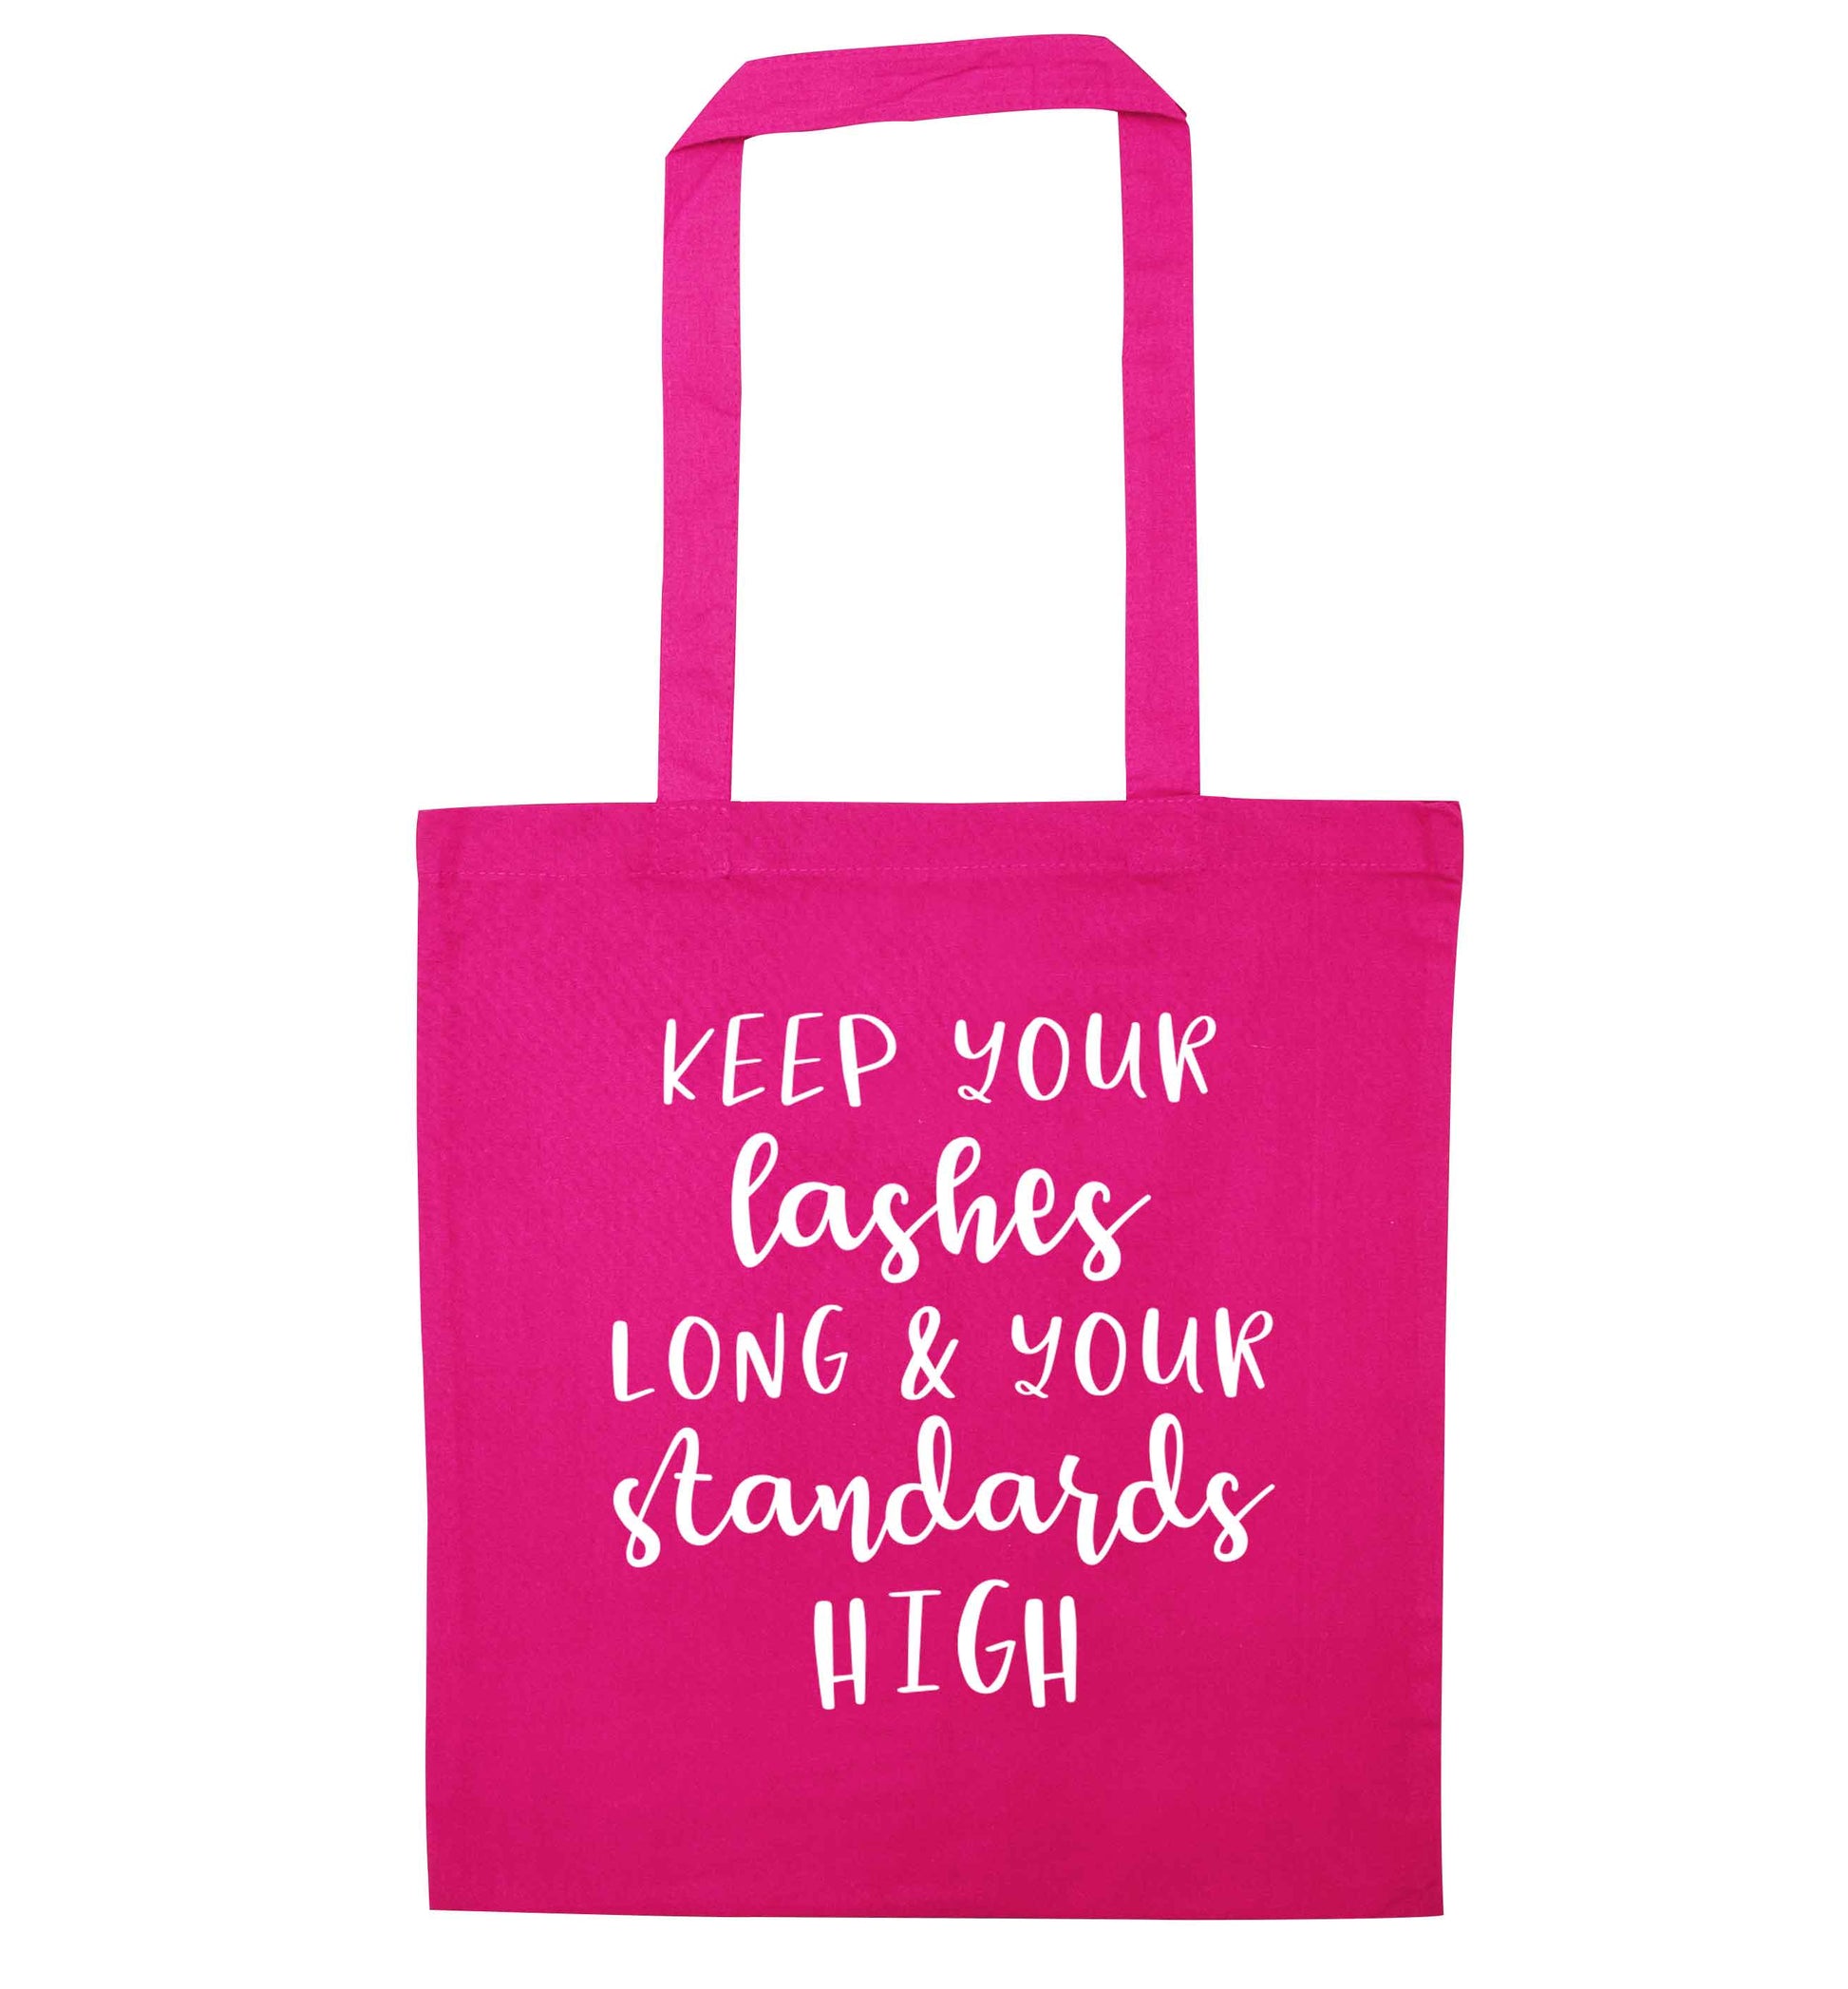 Keep your lashes long and your standards high pink tote bag